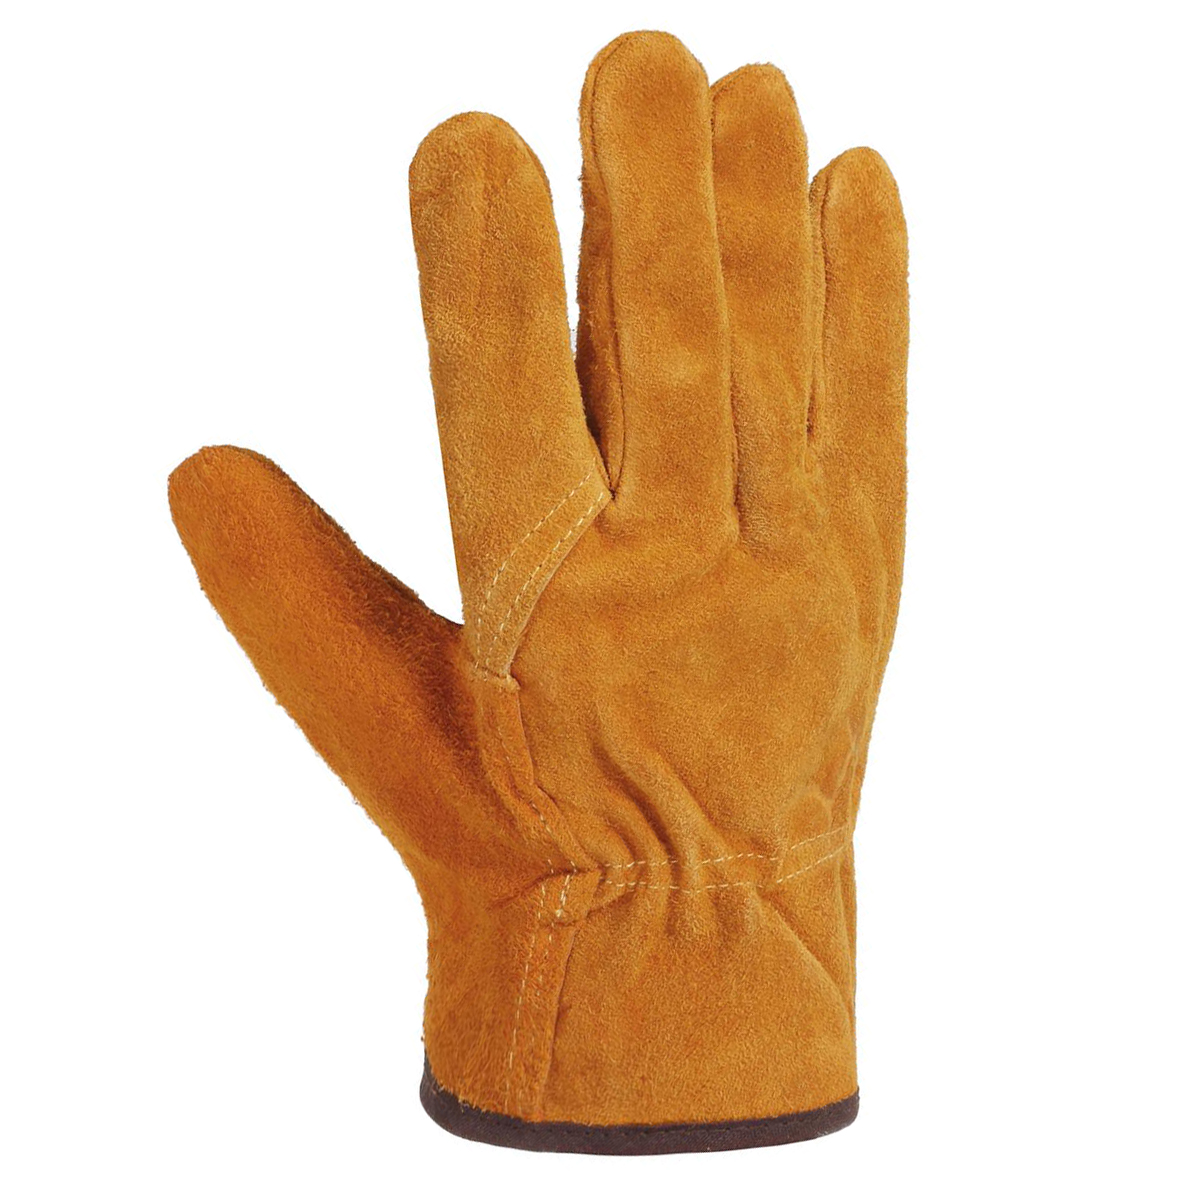 Find Garden Gardening Welder Gloves Men Women Thorn Proof Leather Work Gloves Yellow for Sale on Gipsybee.com with cryptocurrencies